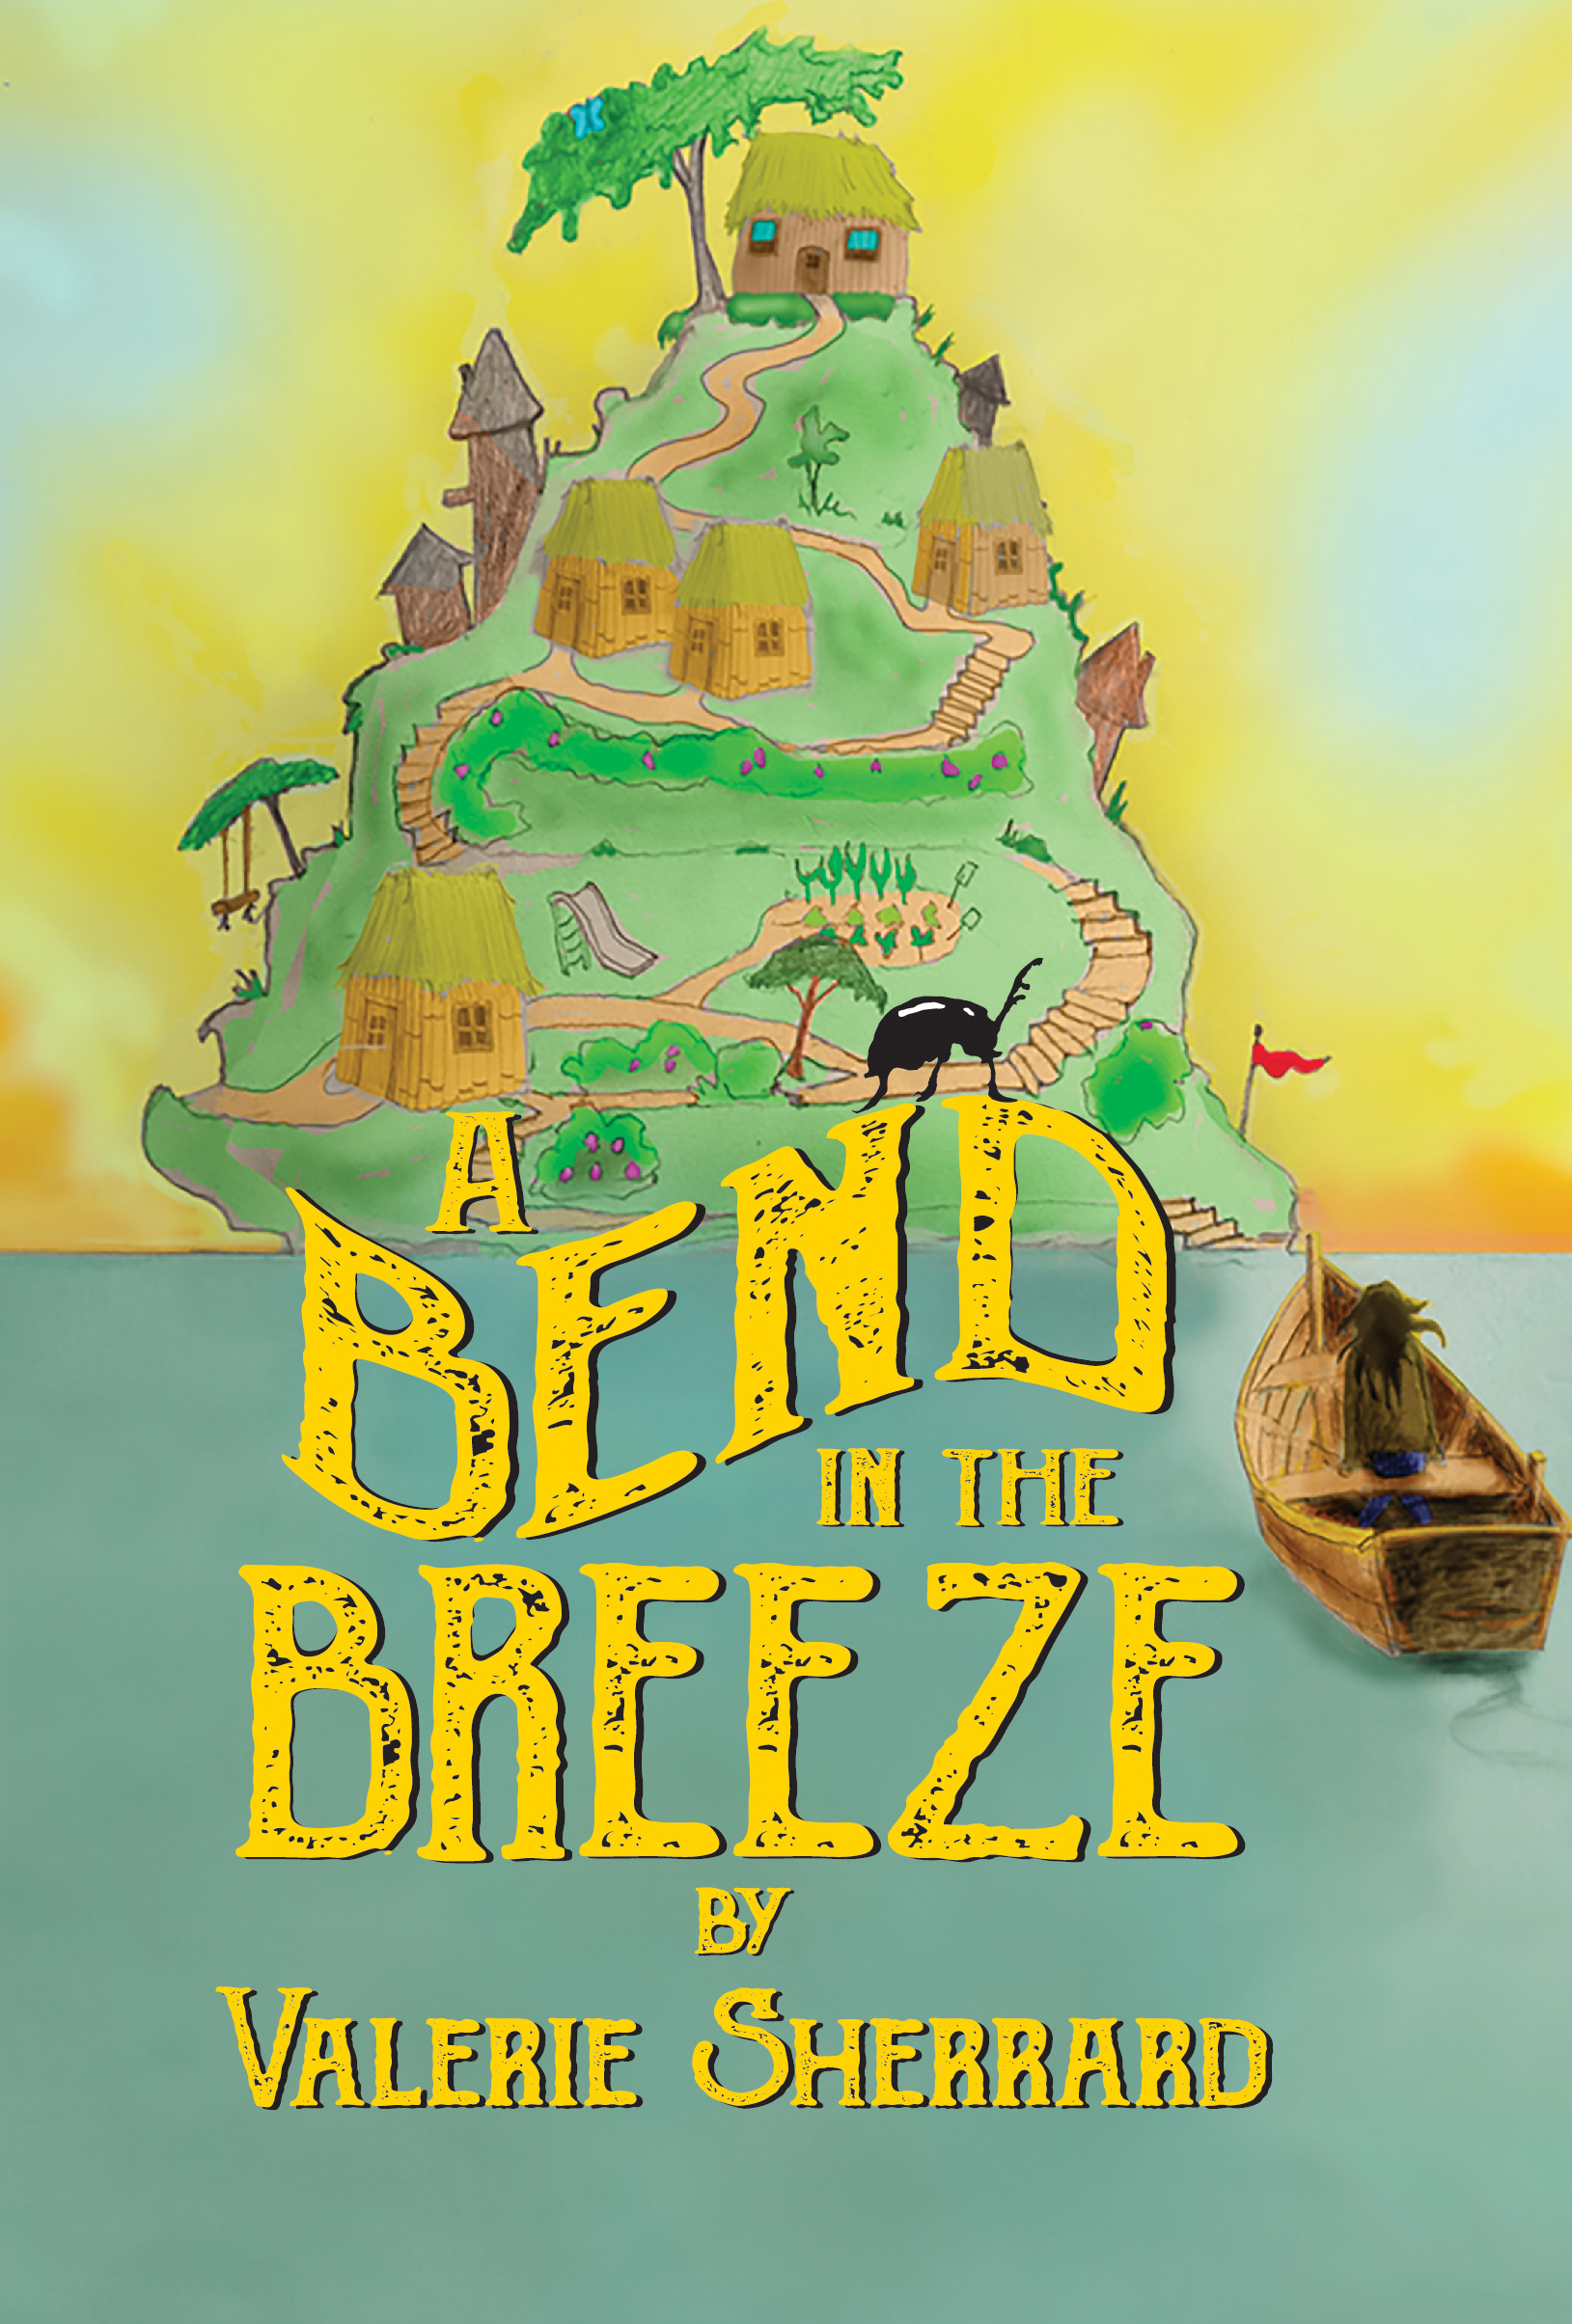 Chris Benjamin Reviews A Bend in the Breeze: With files from Nelly Benautio